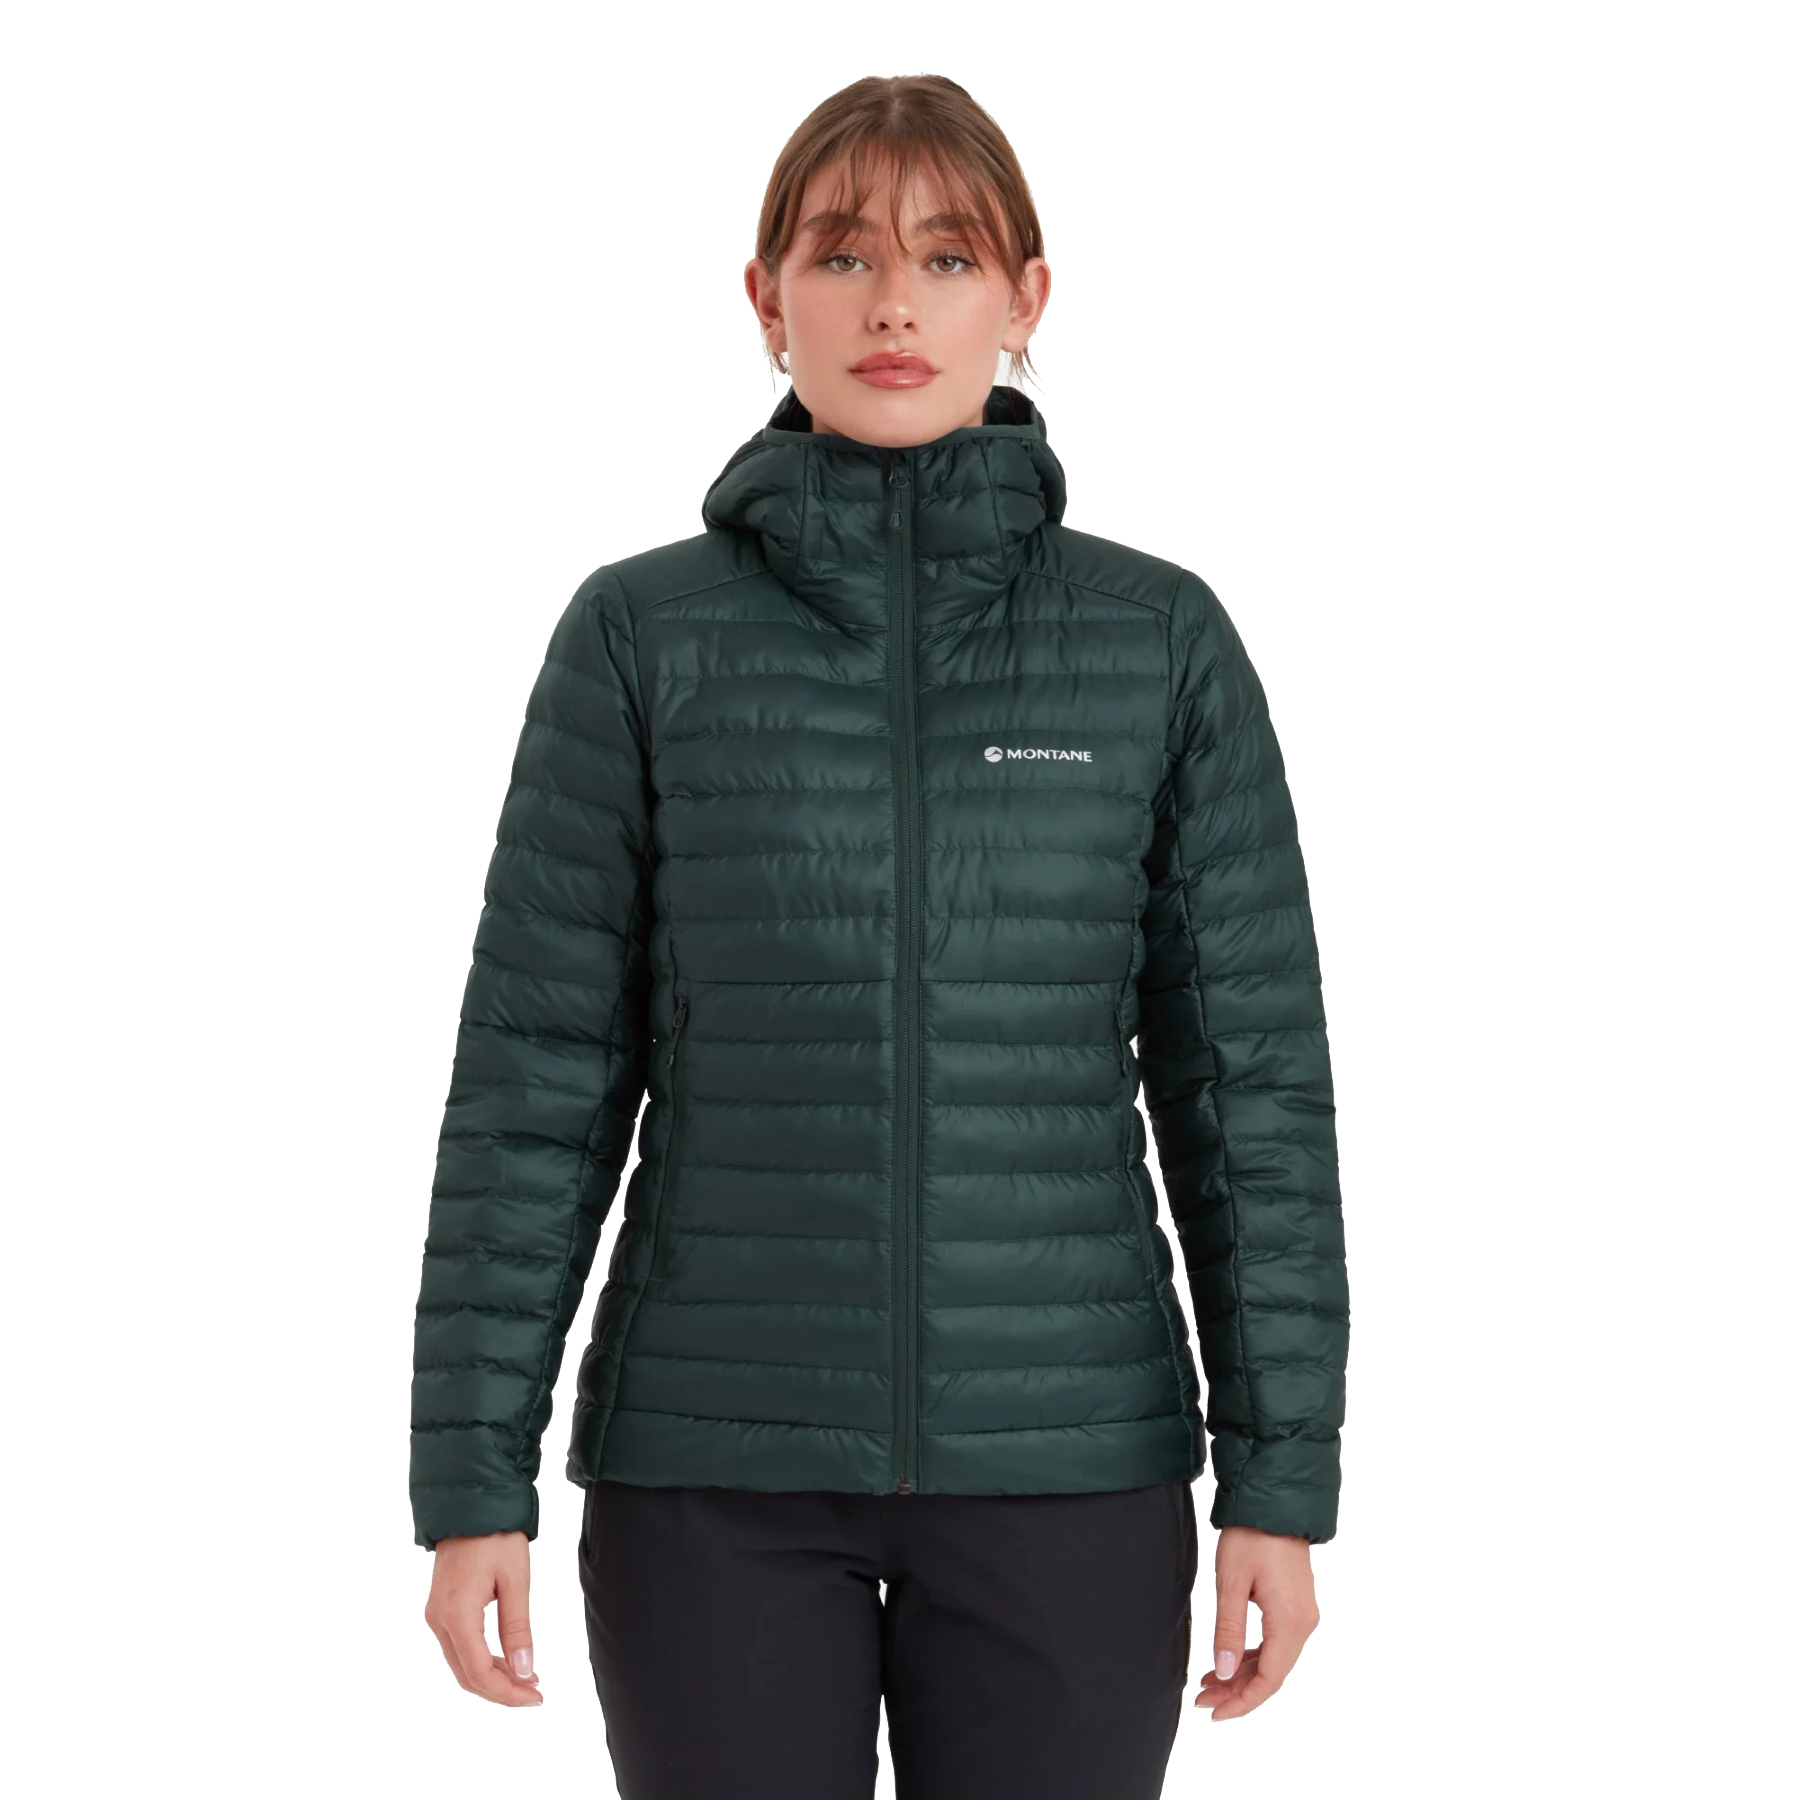 Montane Icarus Women's Hooded Insulated Jacket - deep forest | BIKE24